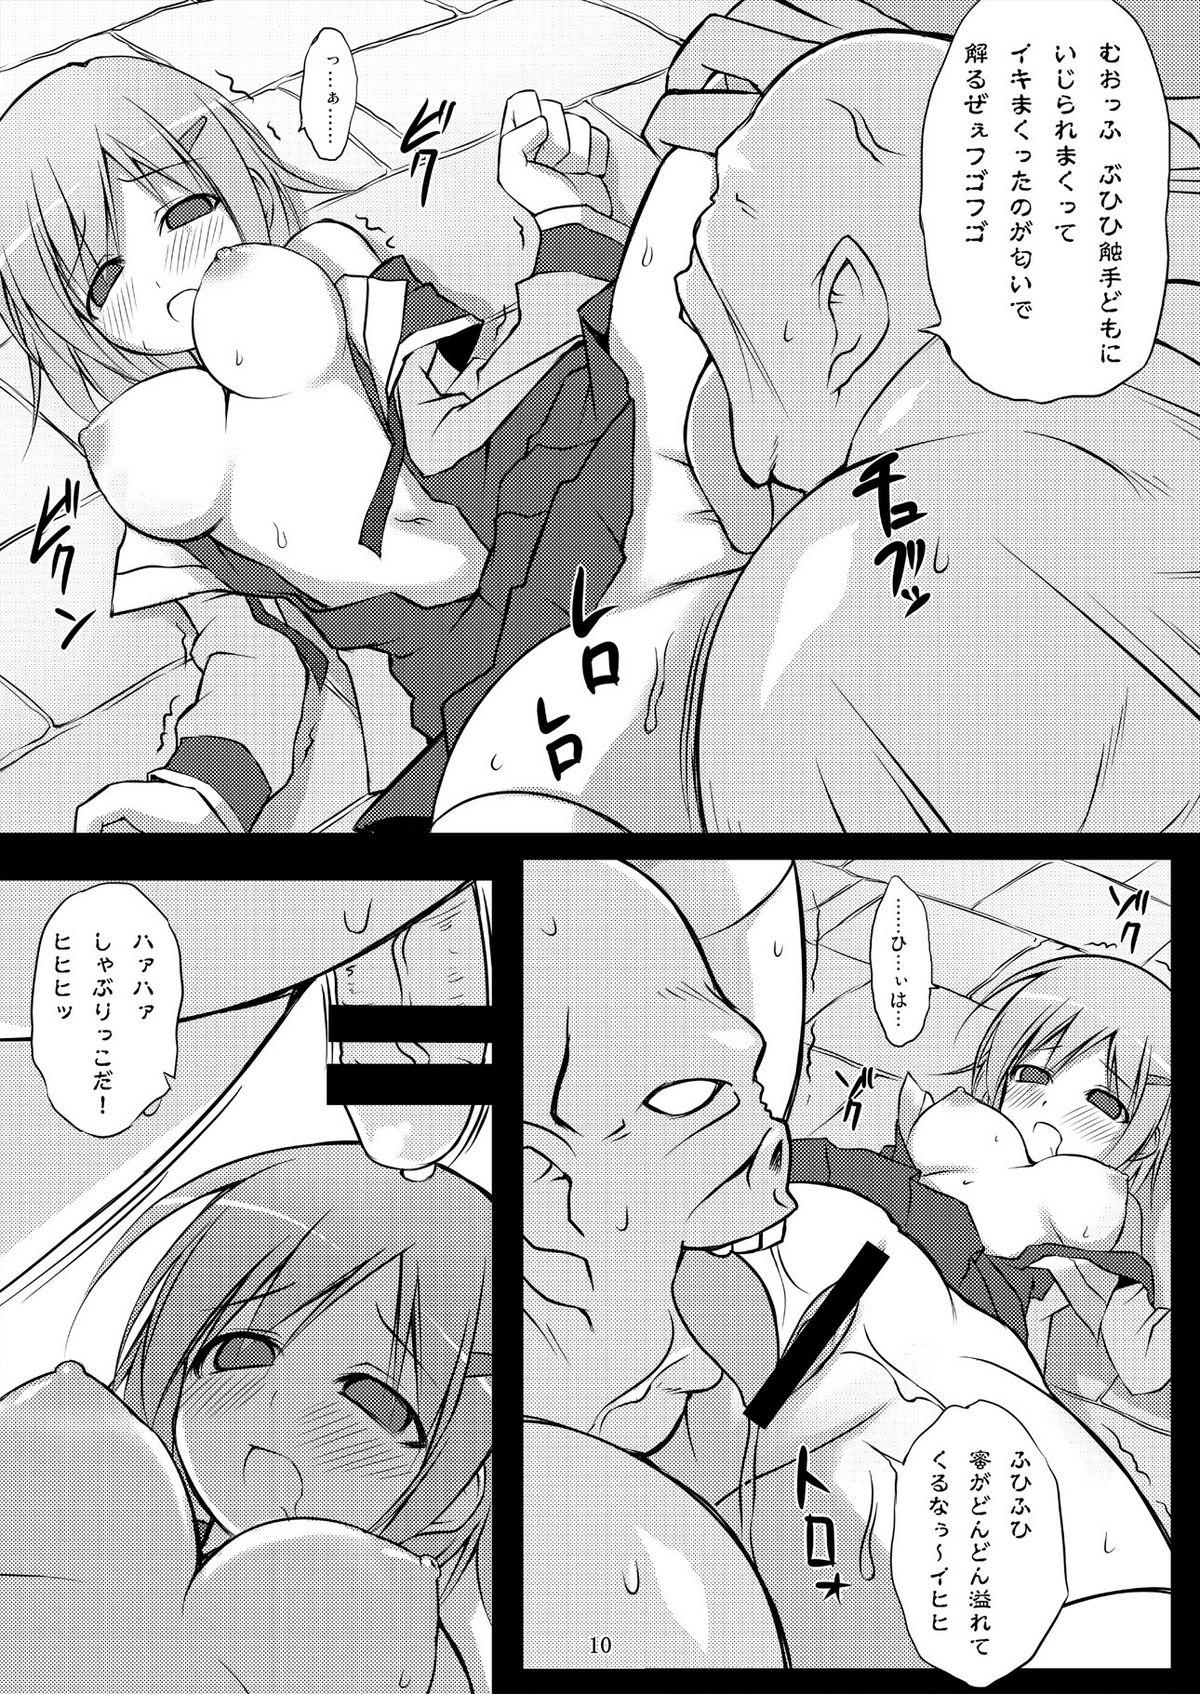 Hair 魔法戦士触獄に堕つ～獄卒の洗礼～ Massages - Page 10